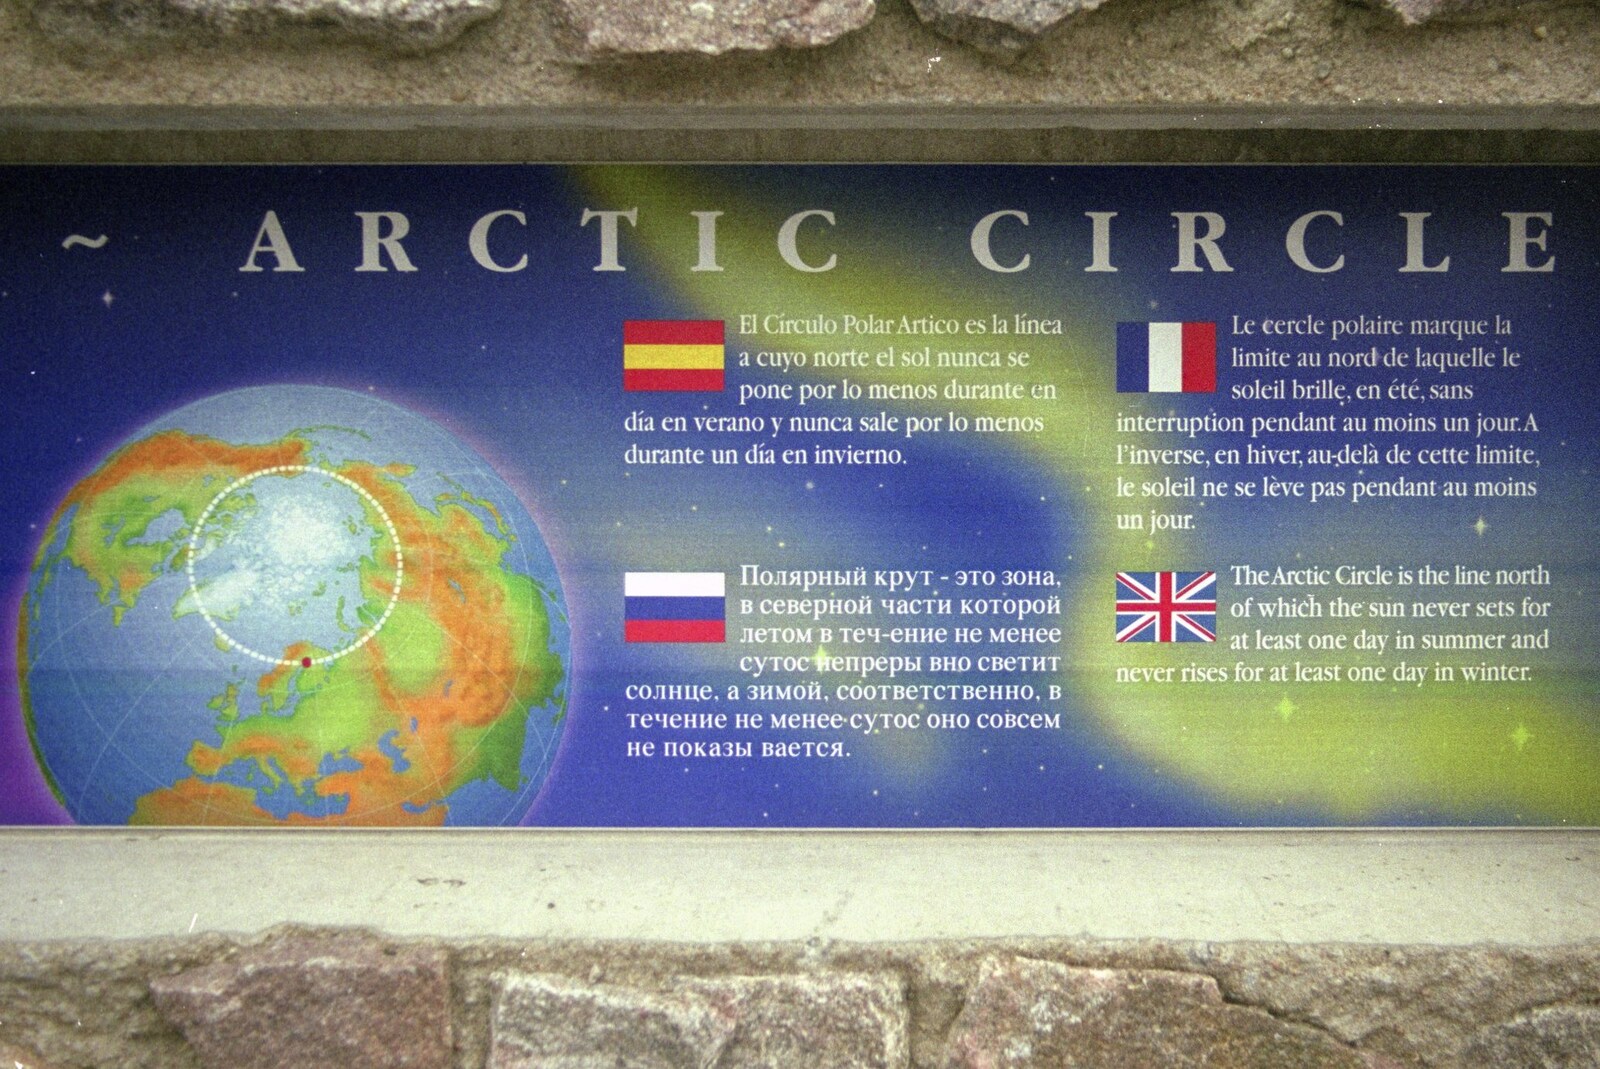 Information about the Arctic circle from A Trip to Rovaniemi and the Arctic Circle, Lapland, Finland - 28th November 1999